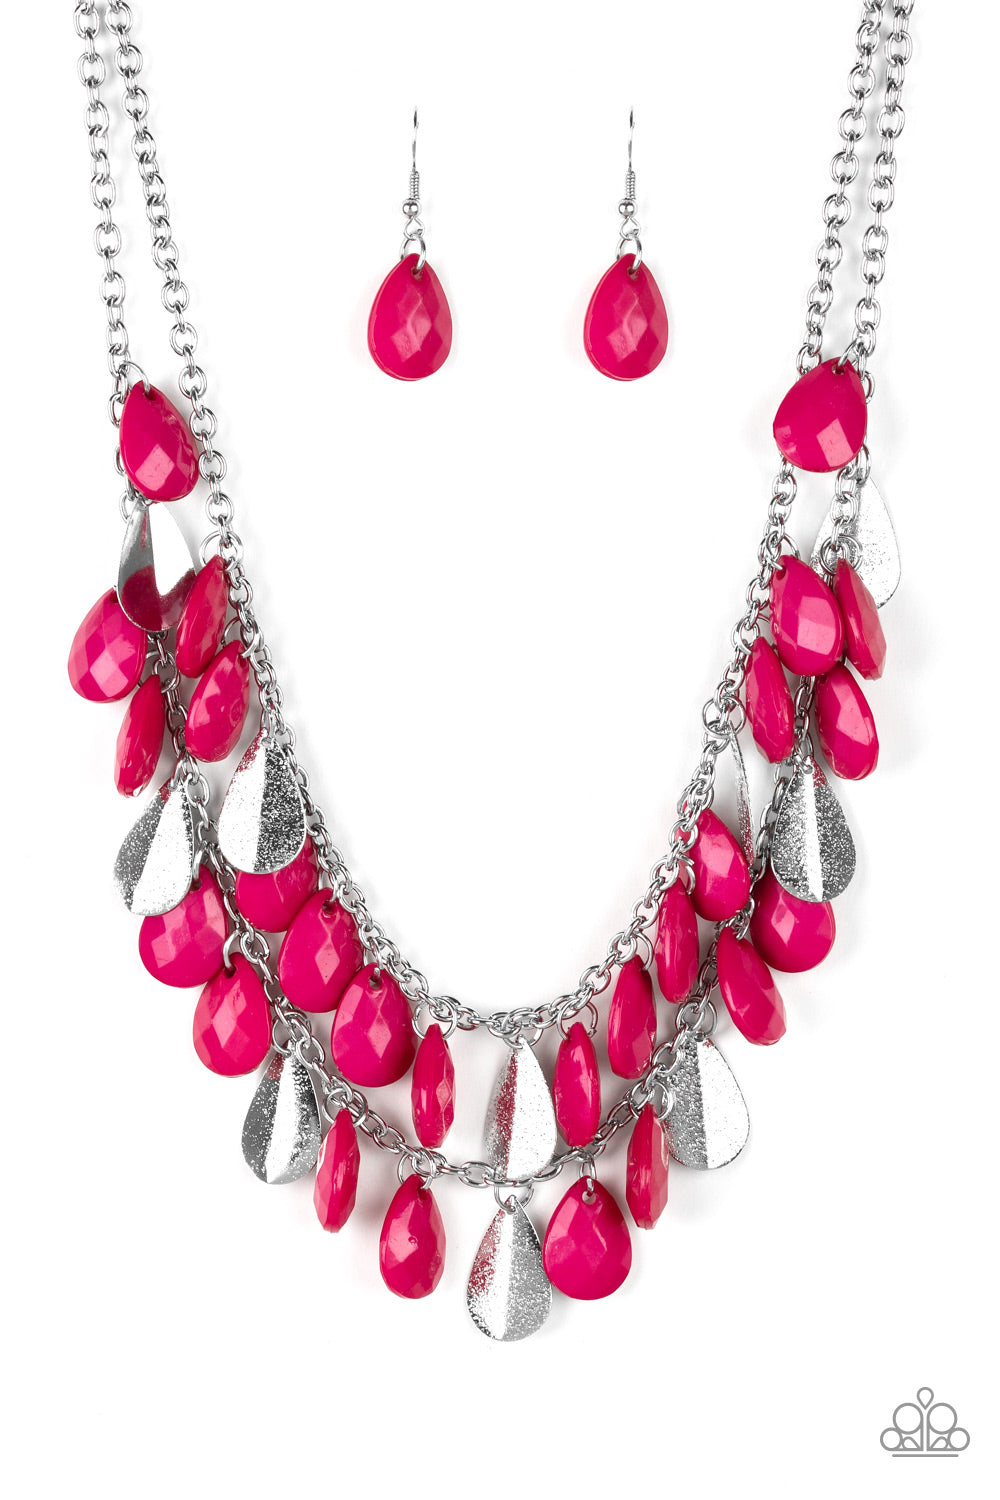 Life of the FIESTA - Pink necklace